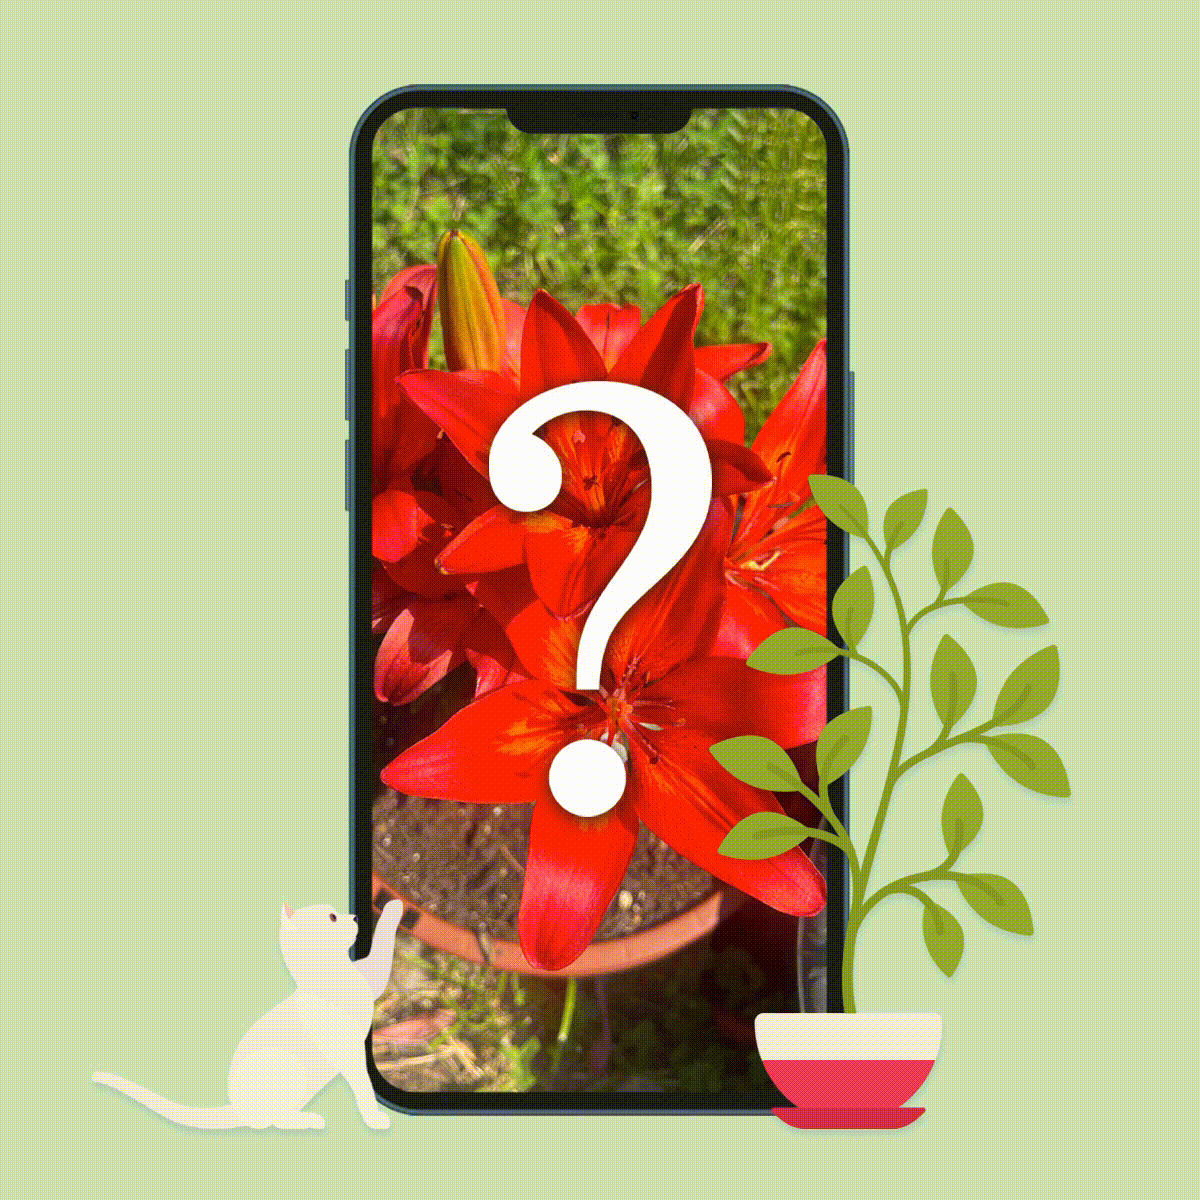 How to Identify Plants with an iPhone in 4 Simple Steps